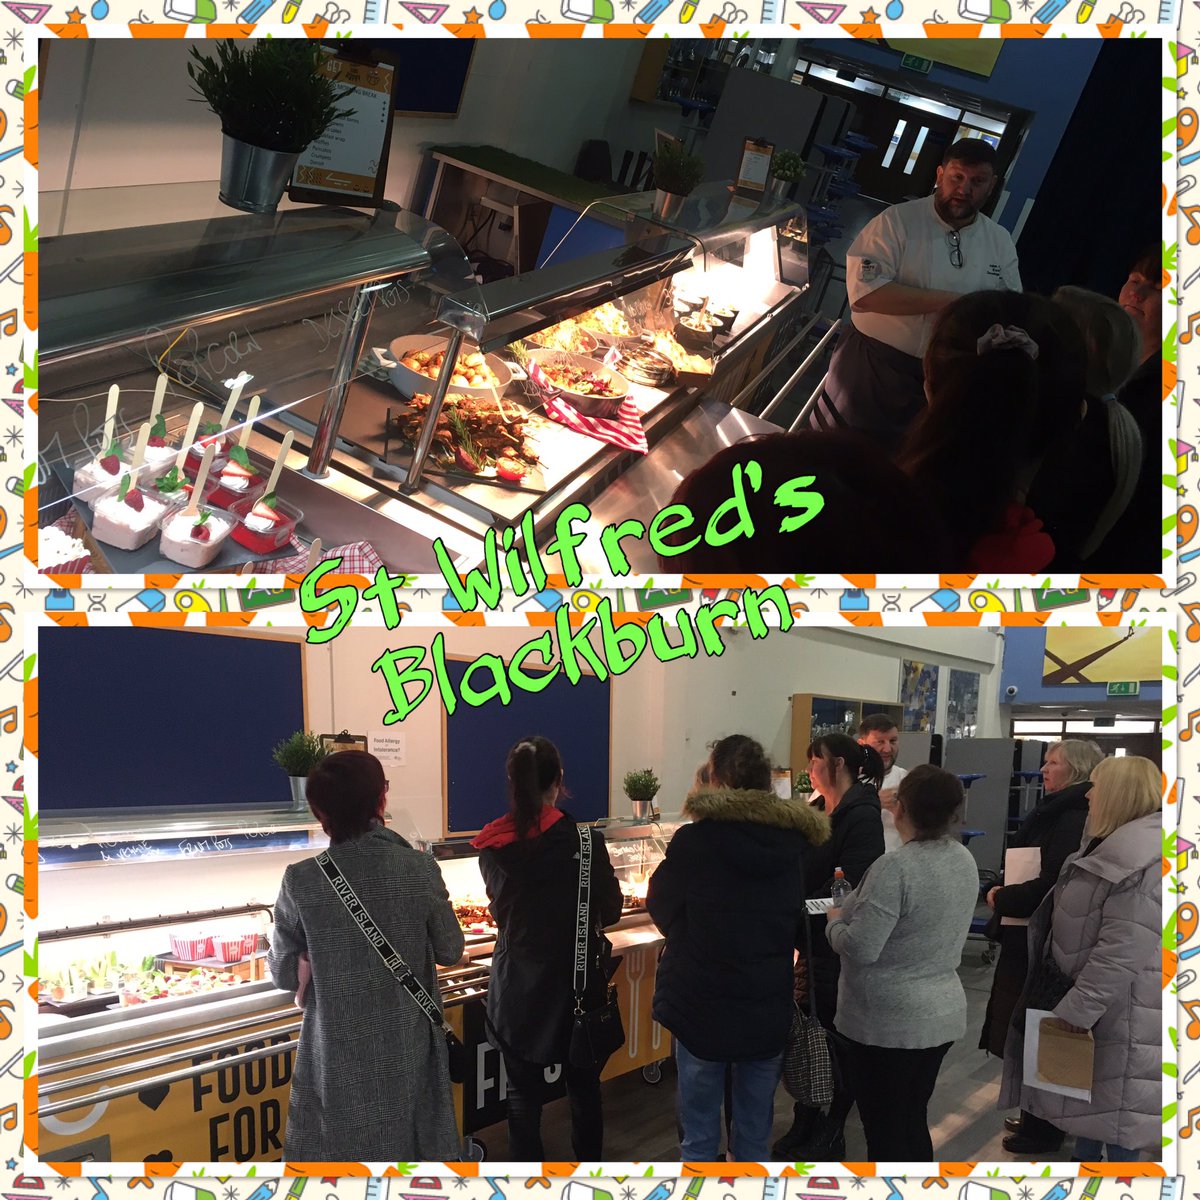 “Welcome to Mellors” induction training… the team at St Wilfred’s Blackburn getting a flavour of the offer, from our Exec Development Chef John Connolly. 👍@mellorscatering @mrtonybaloni @Andrew_W4 @DBNutrition_ @AnneKav1968 @nugent_nicola @Jackier50345470